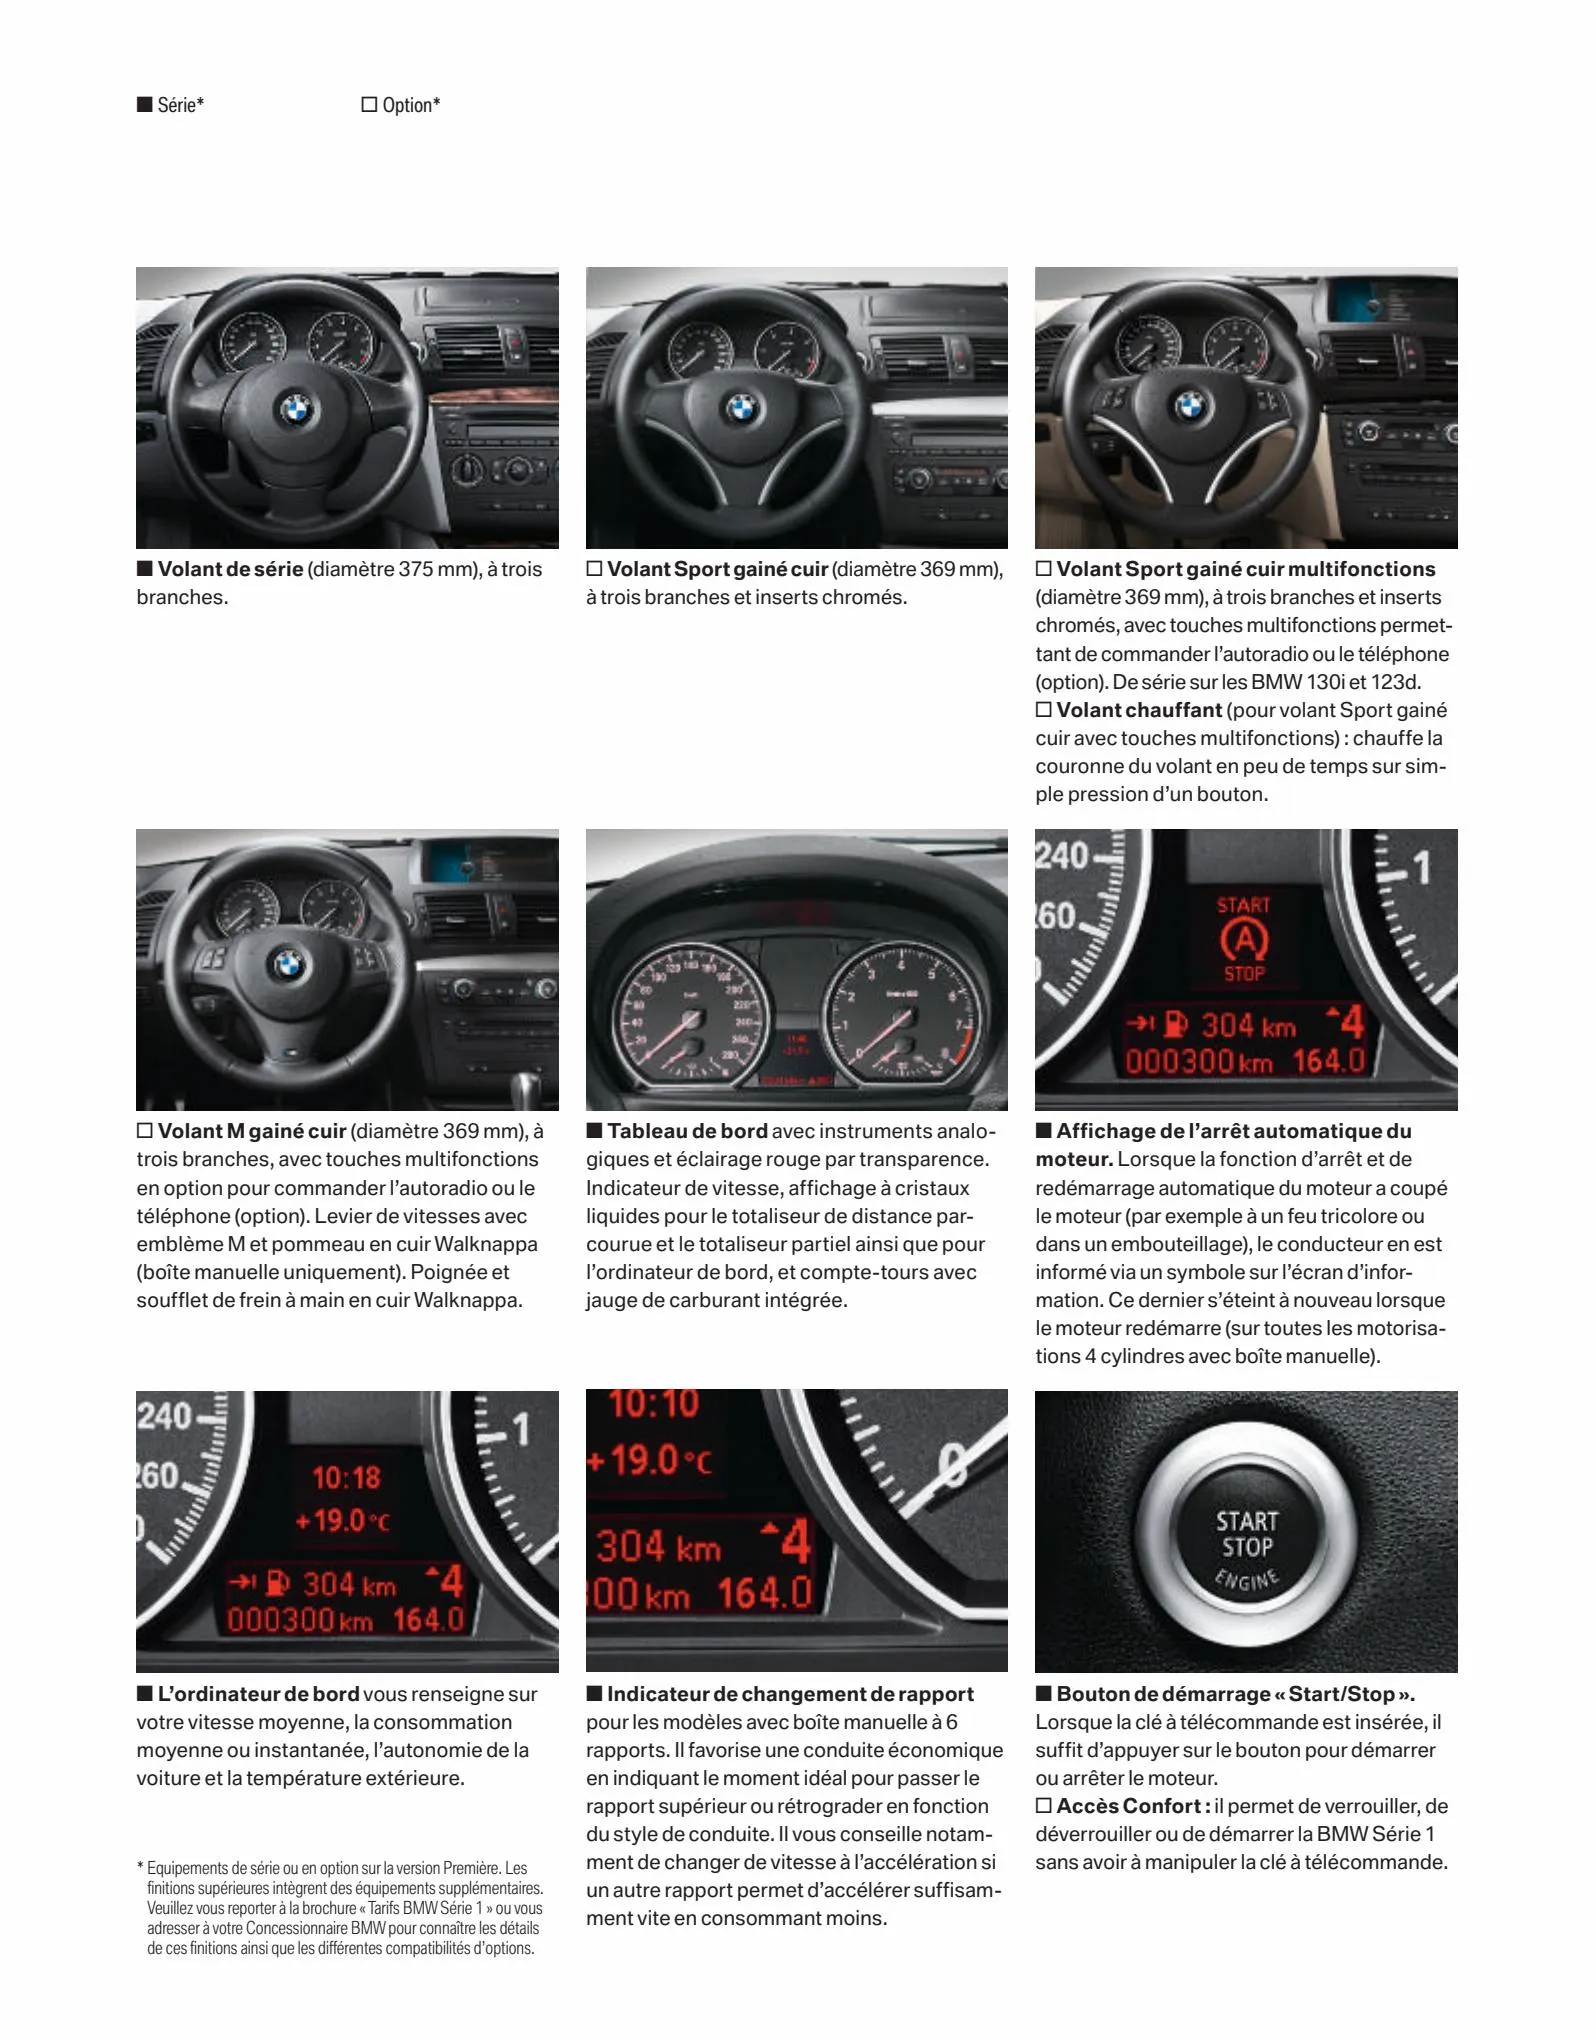 Catalogue BMW Serie1 Berline, page 00014